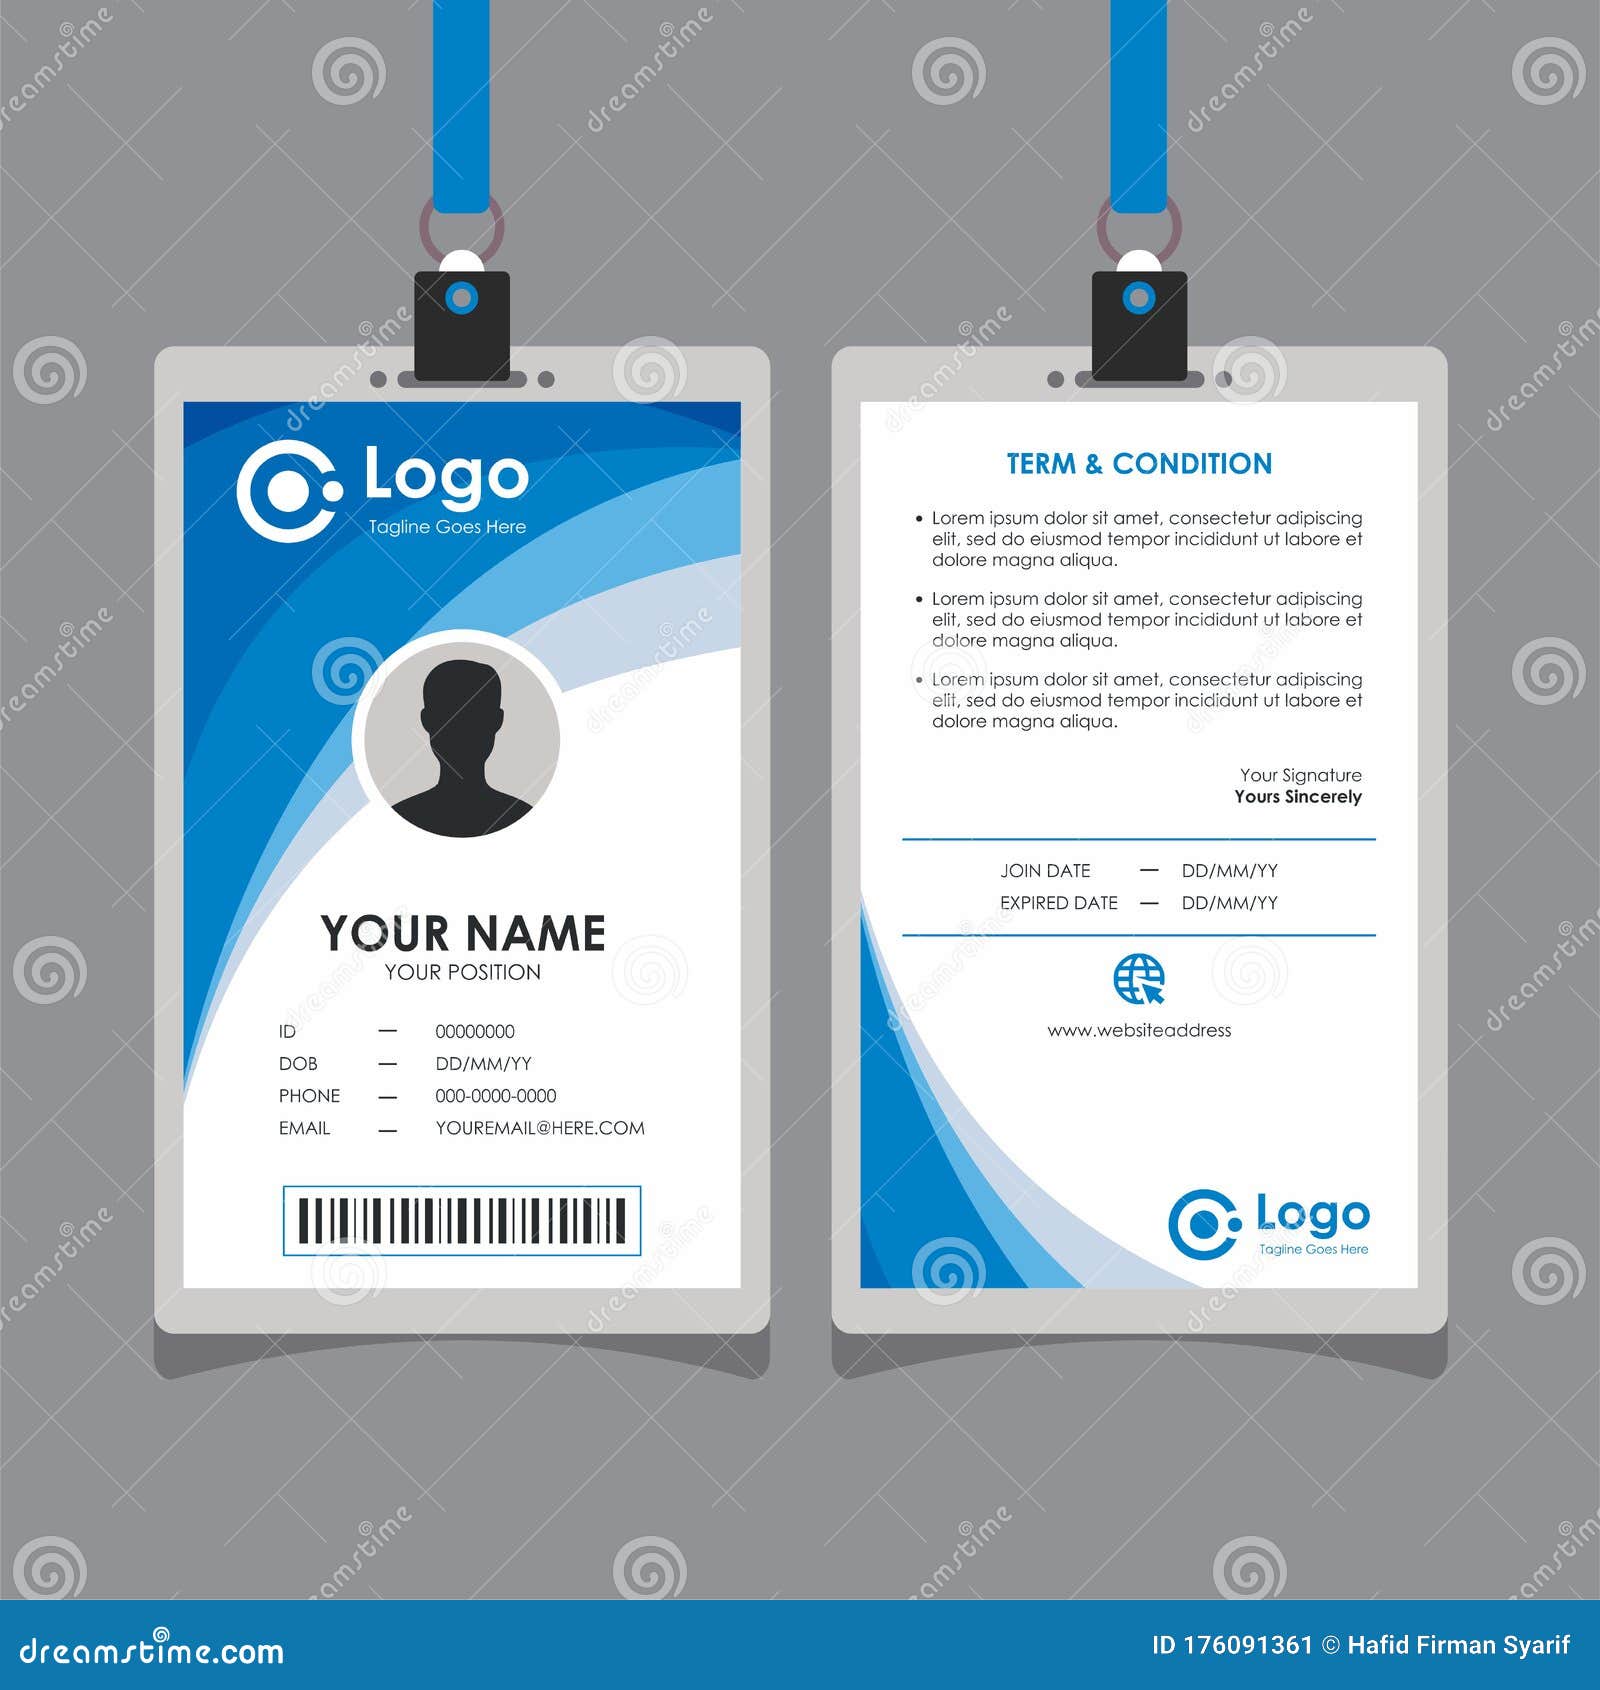 Simple Clean Stylish Blue Wave Id Card Design Stock Vector - Illustration  of design, background: 176091361